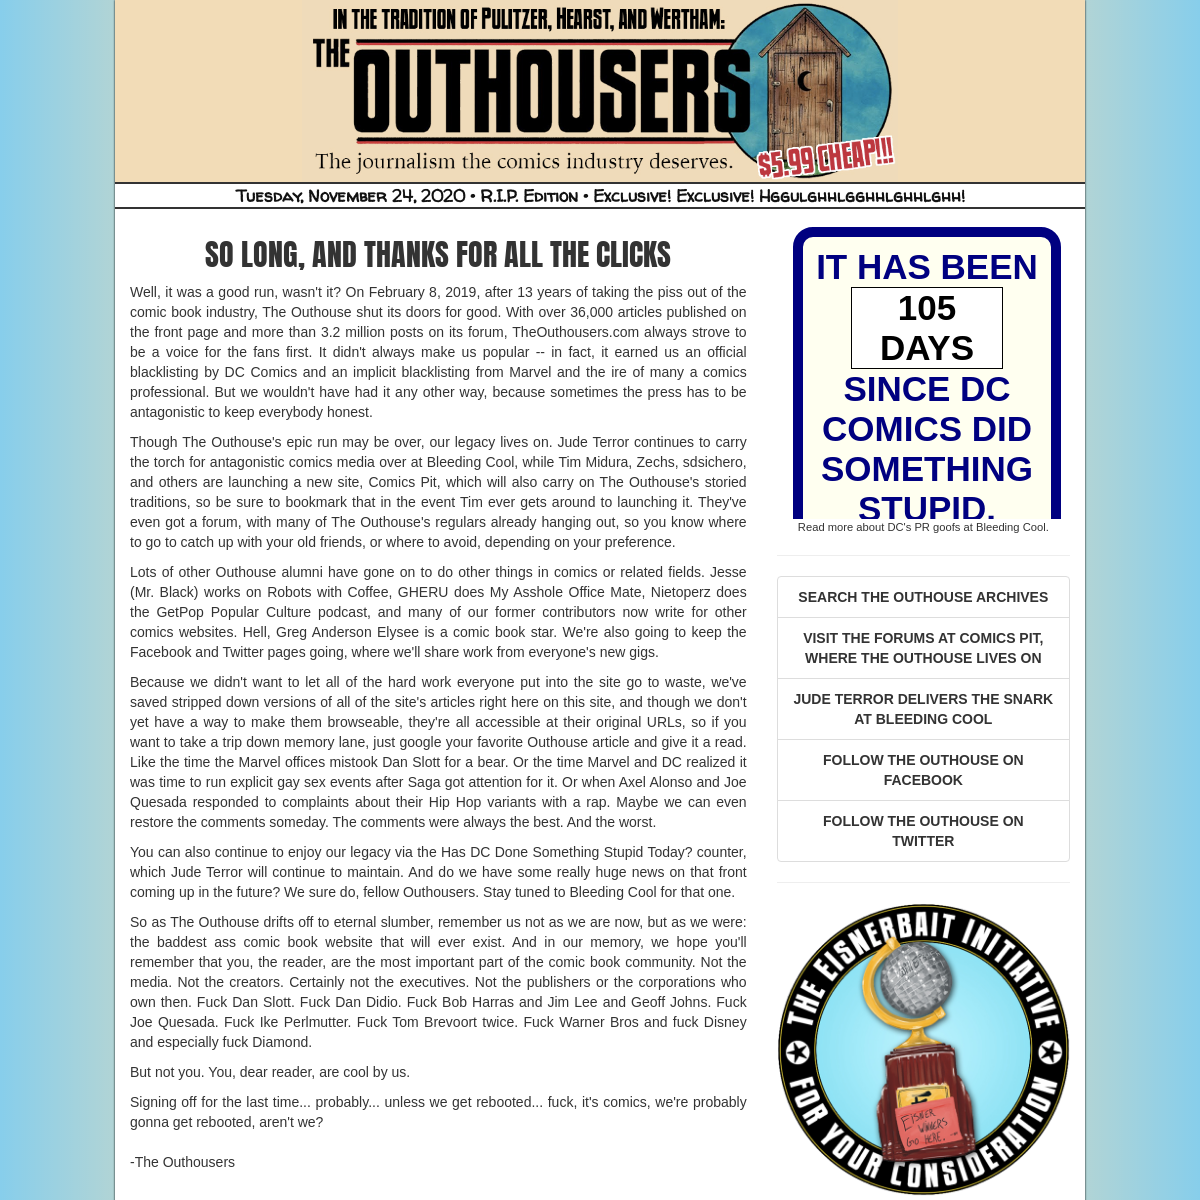 A complete backup of theouthousers.com